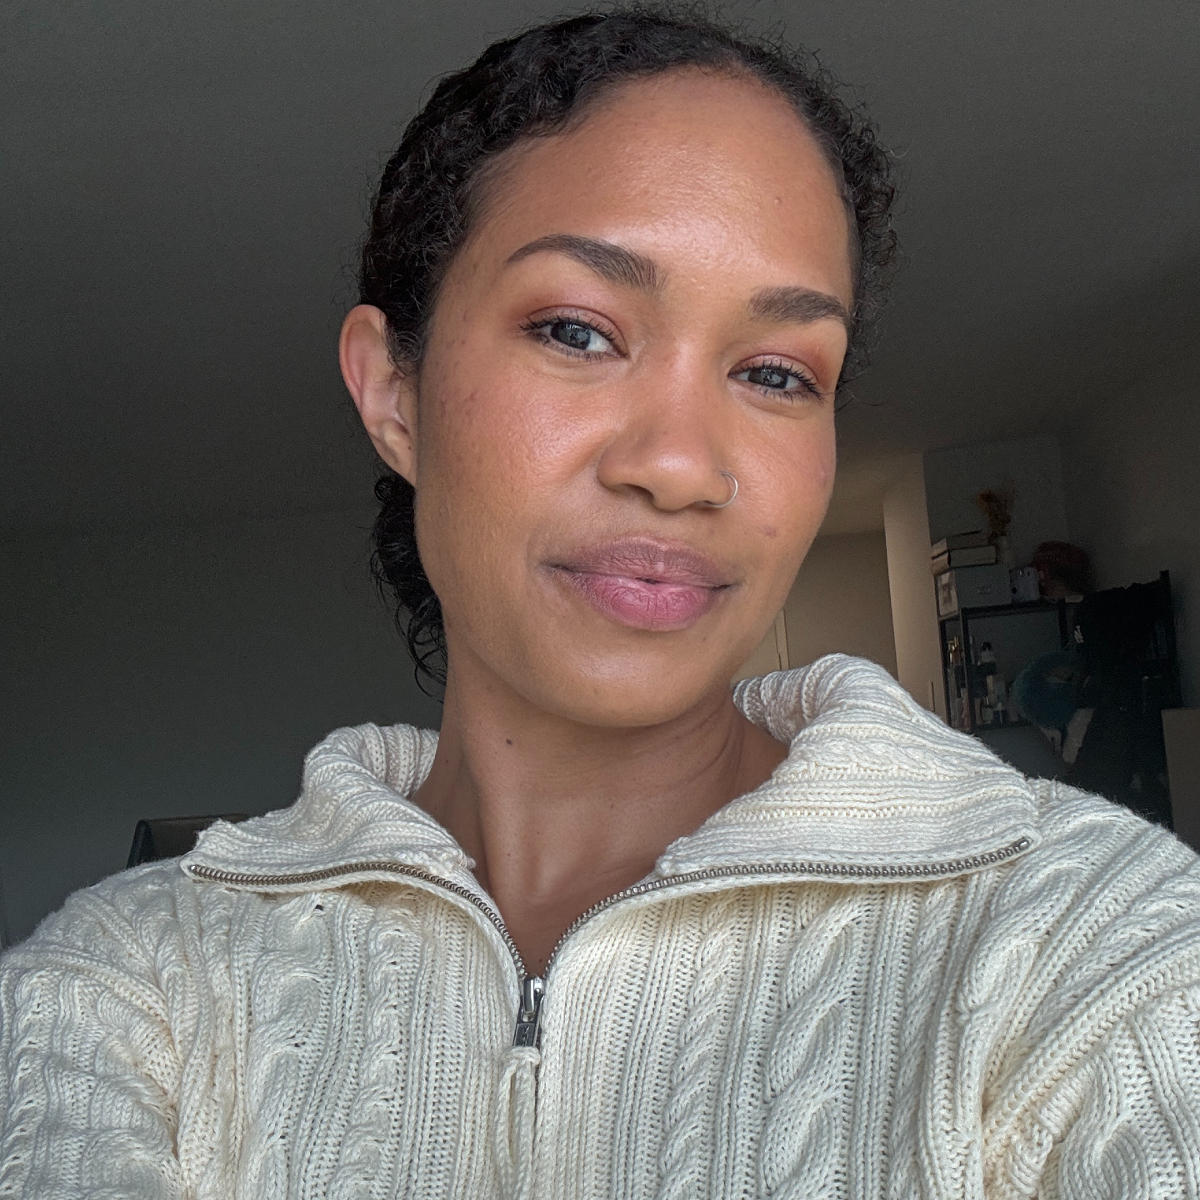 I Tried E.l.f.'s New $8 Foundation—Here Are My Honest Thoughts